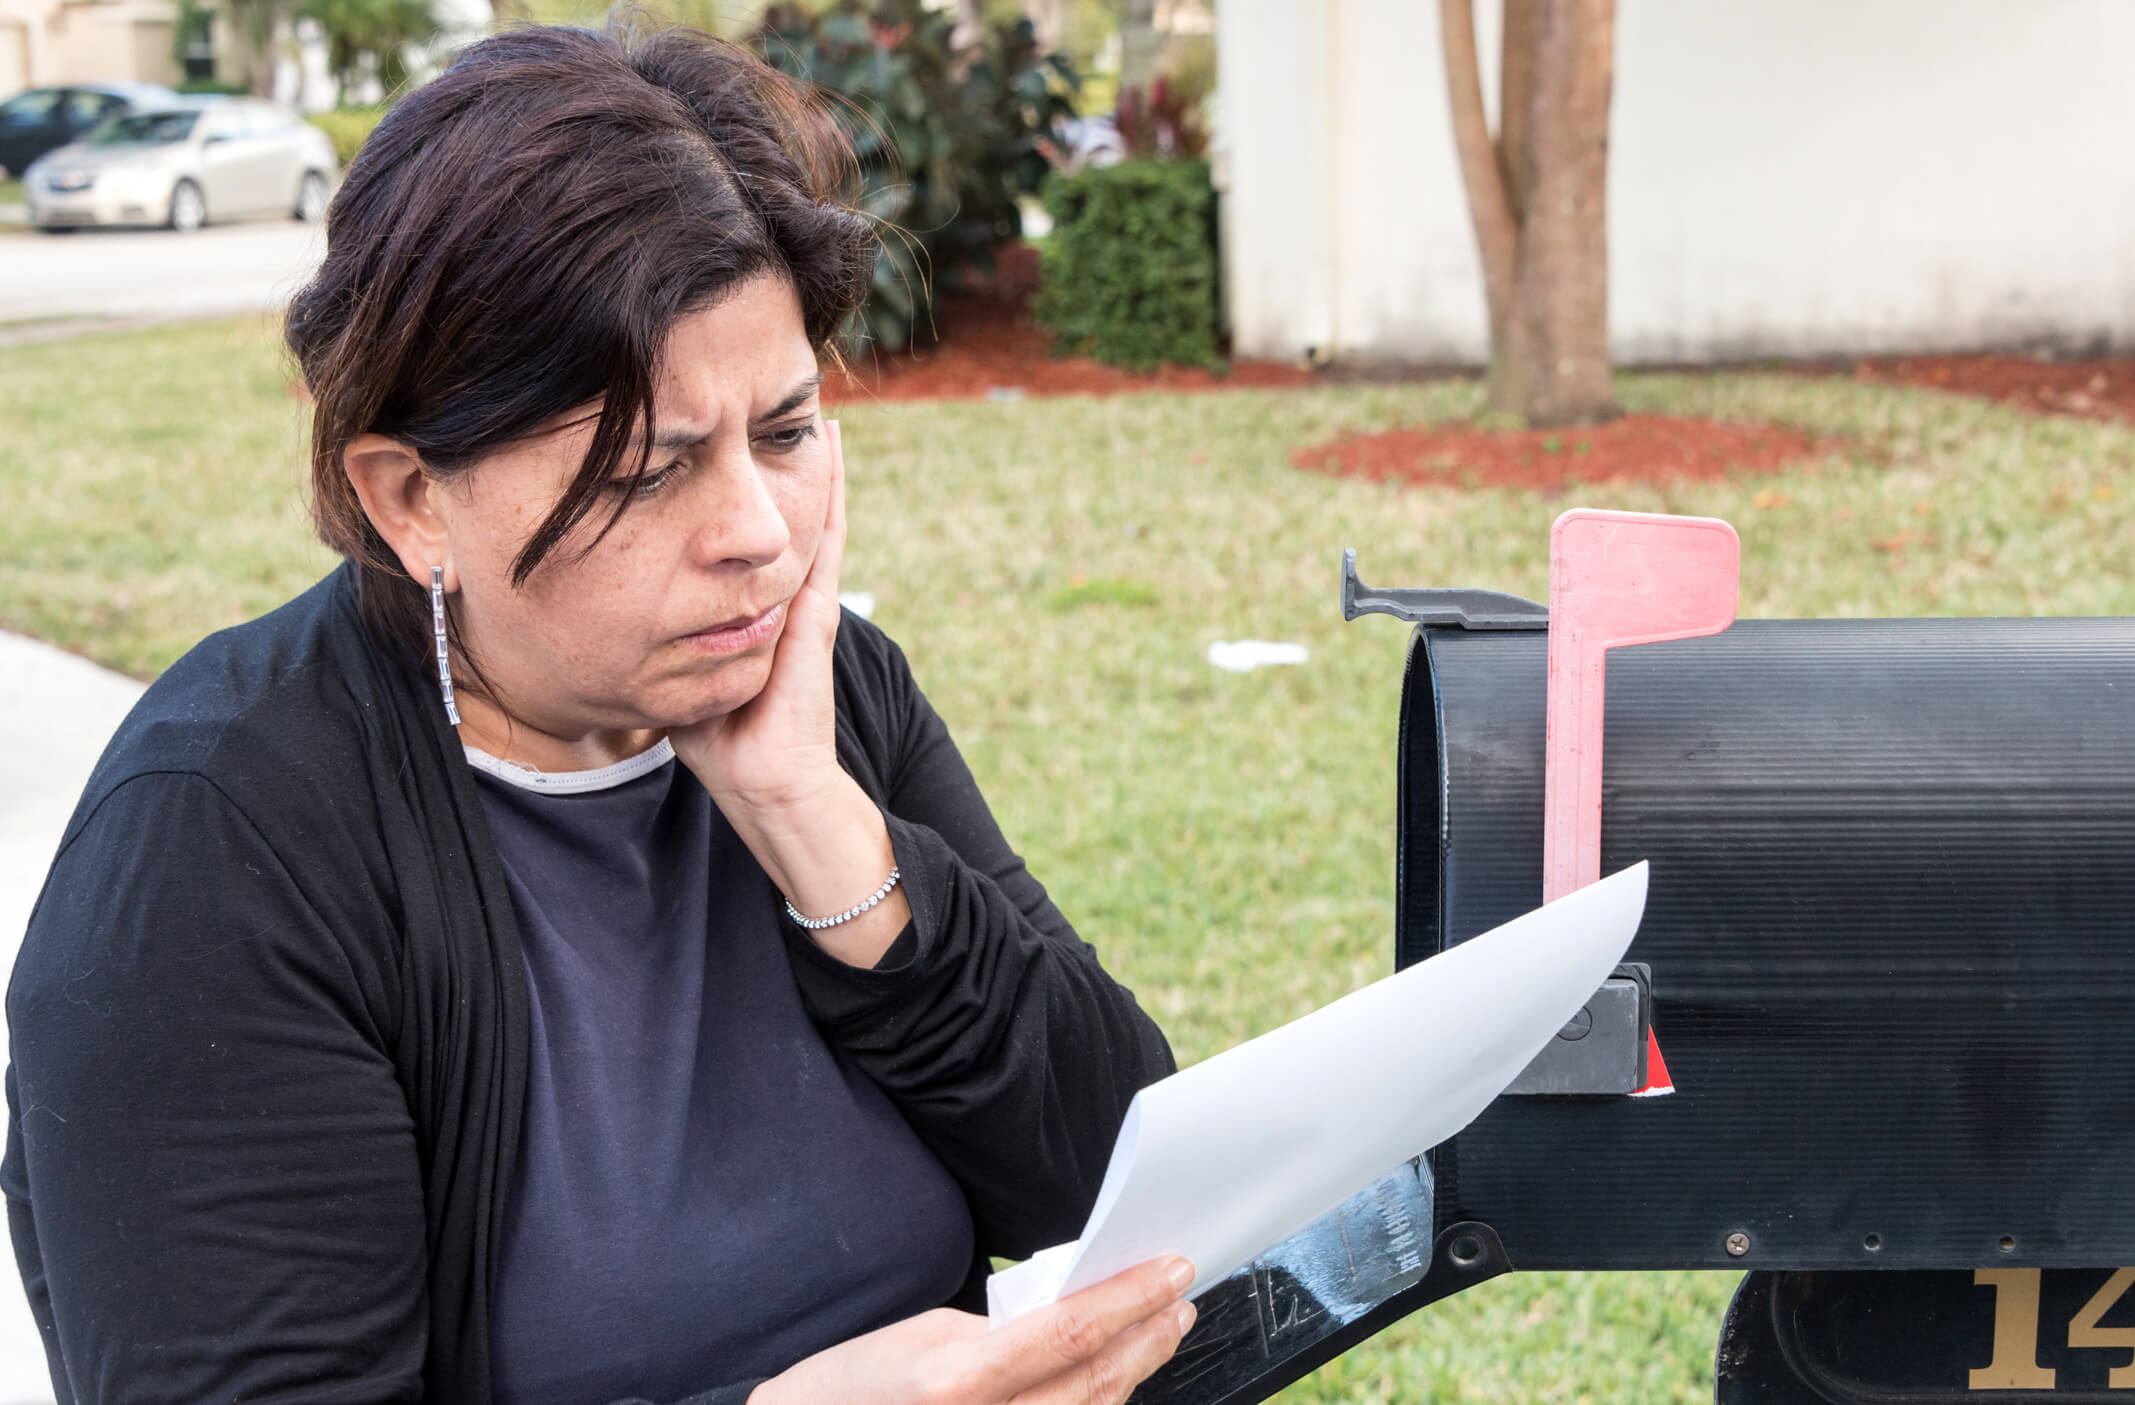 woman upset after getting irs notice cp14 in the mail